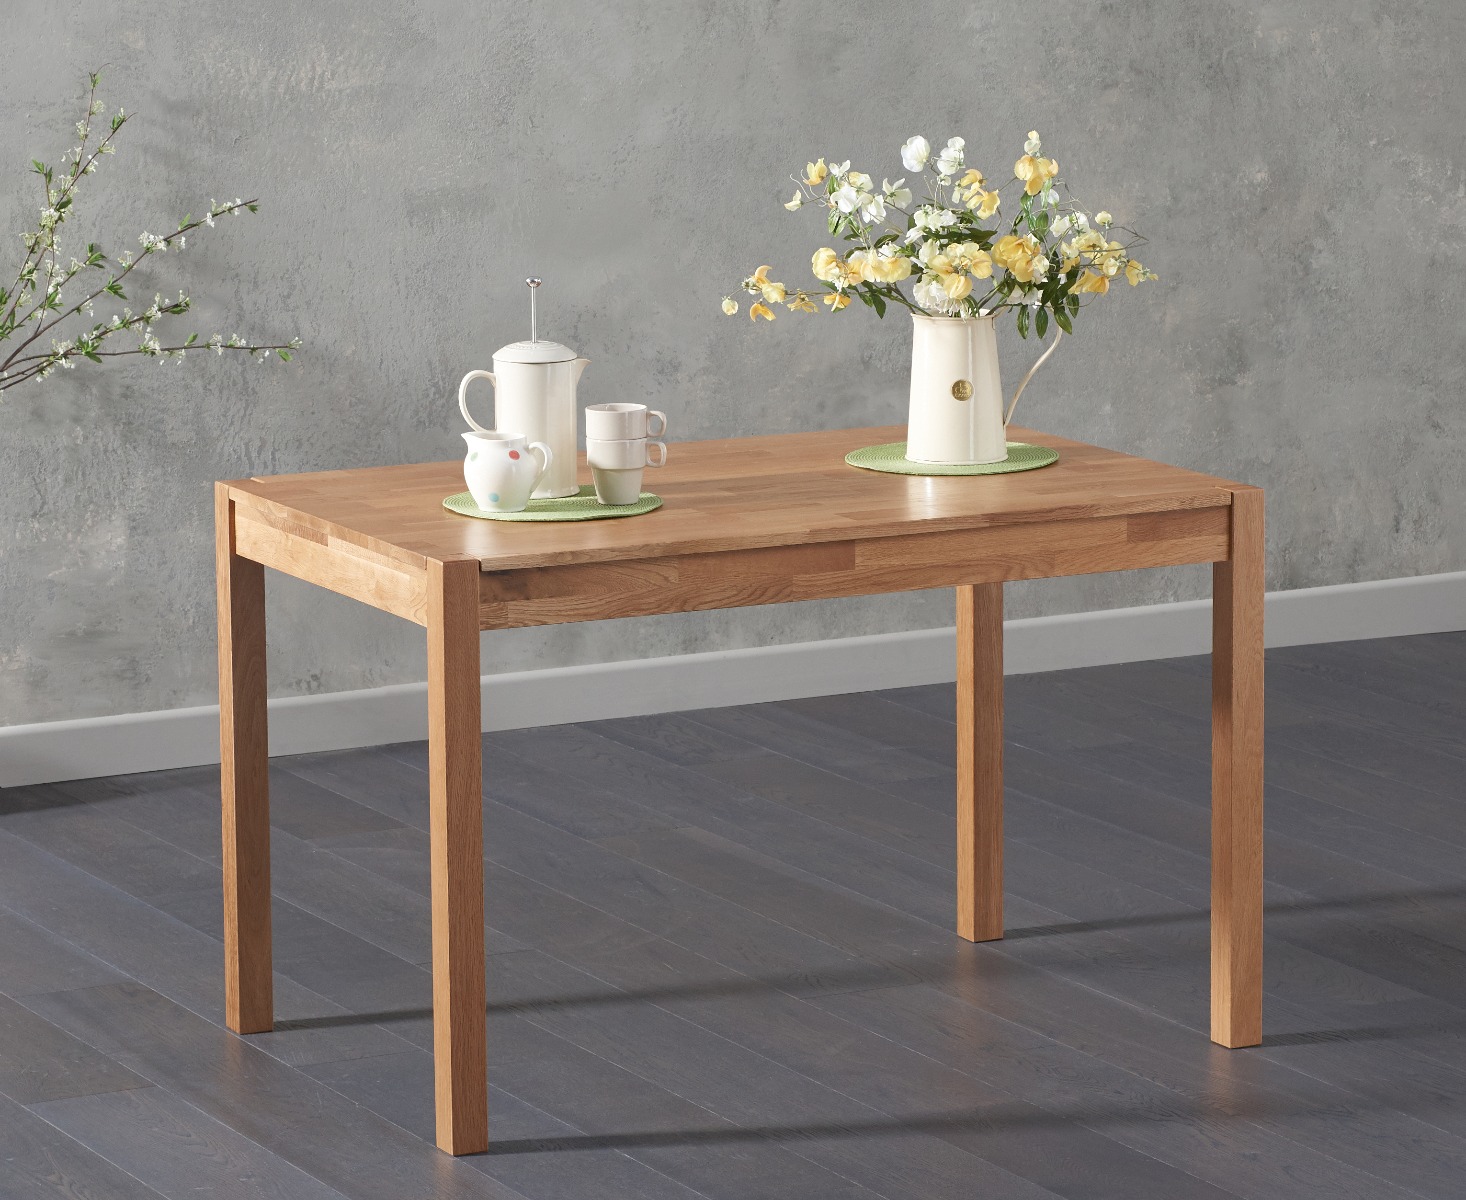 Photo 1 of York 120cm solid oak dining table with lila grey velvet benches with backs